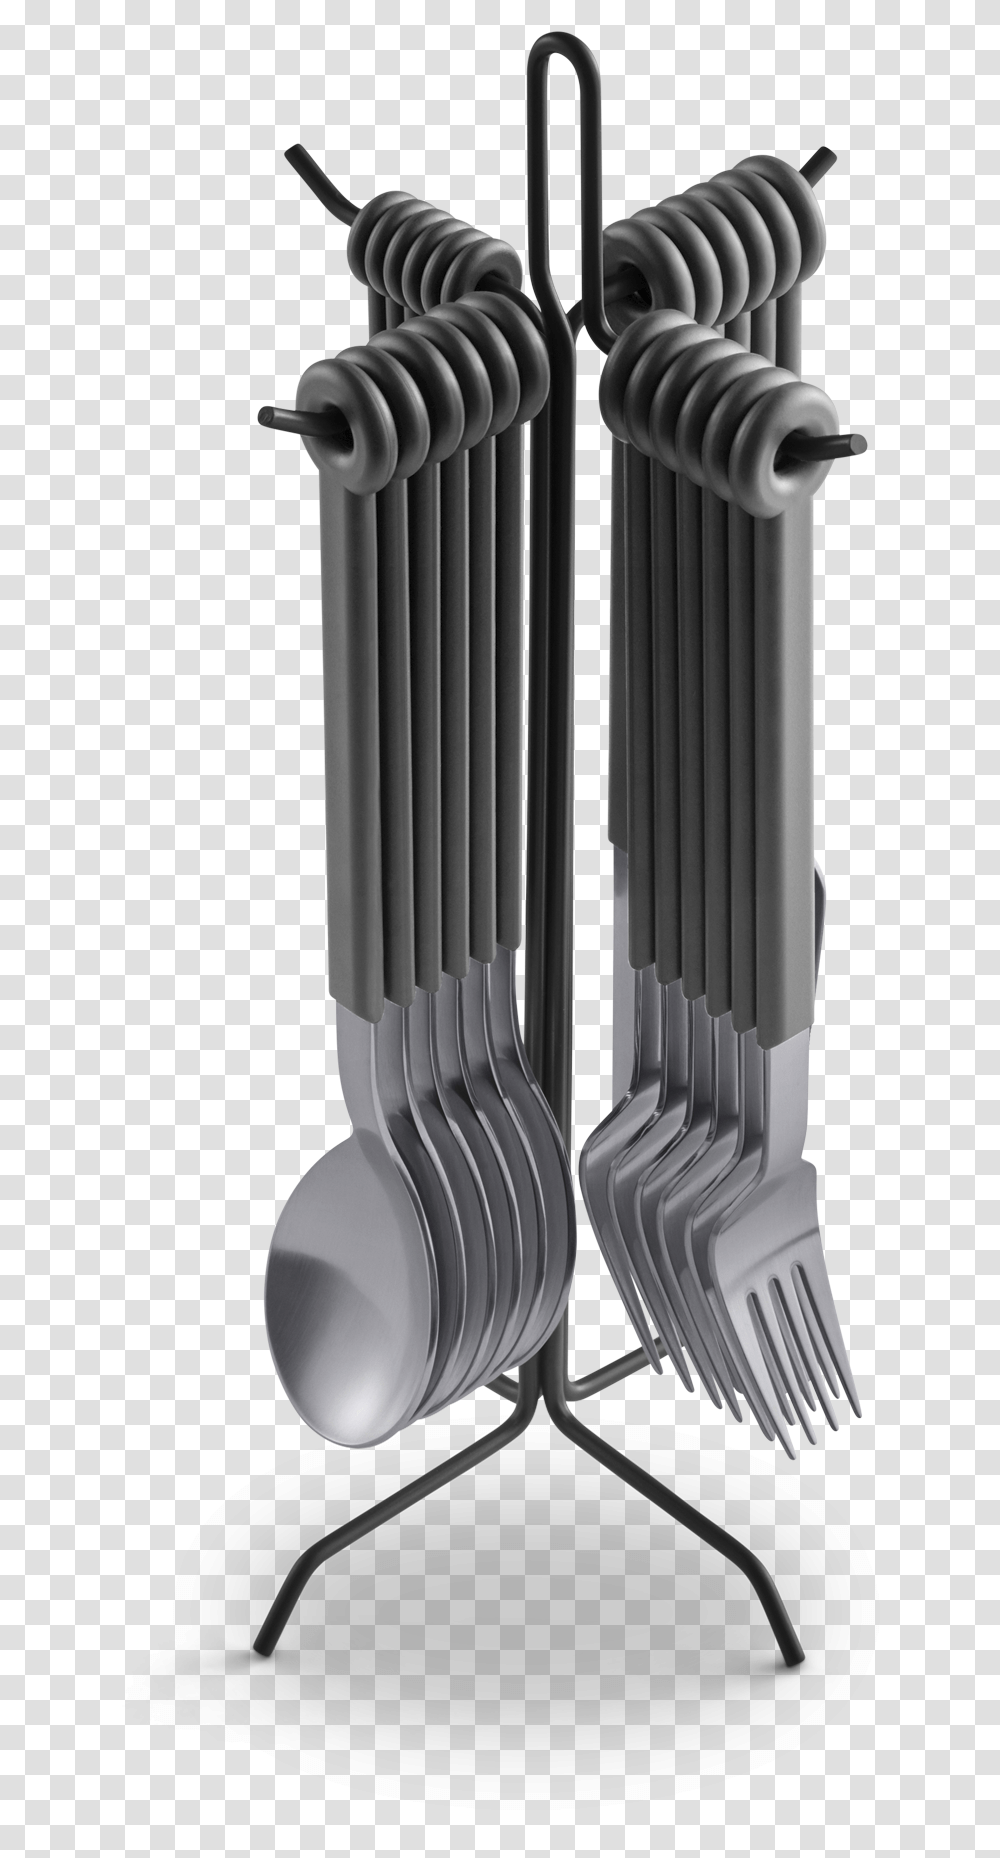 Mono Ring Flatware Set 24 Stand Grey Mono Ring Flatware Set Black With Stand, Cutlery, Metropolis, City, Urban Transparent Png